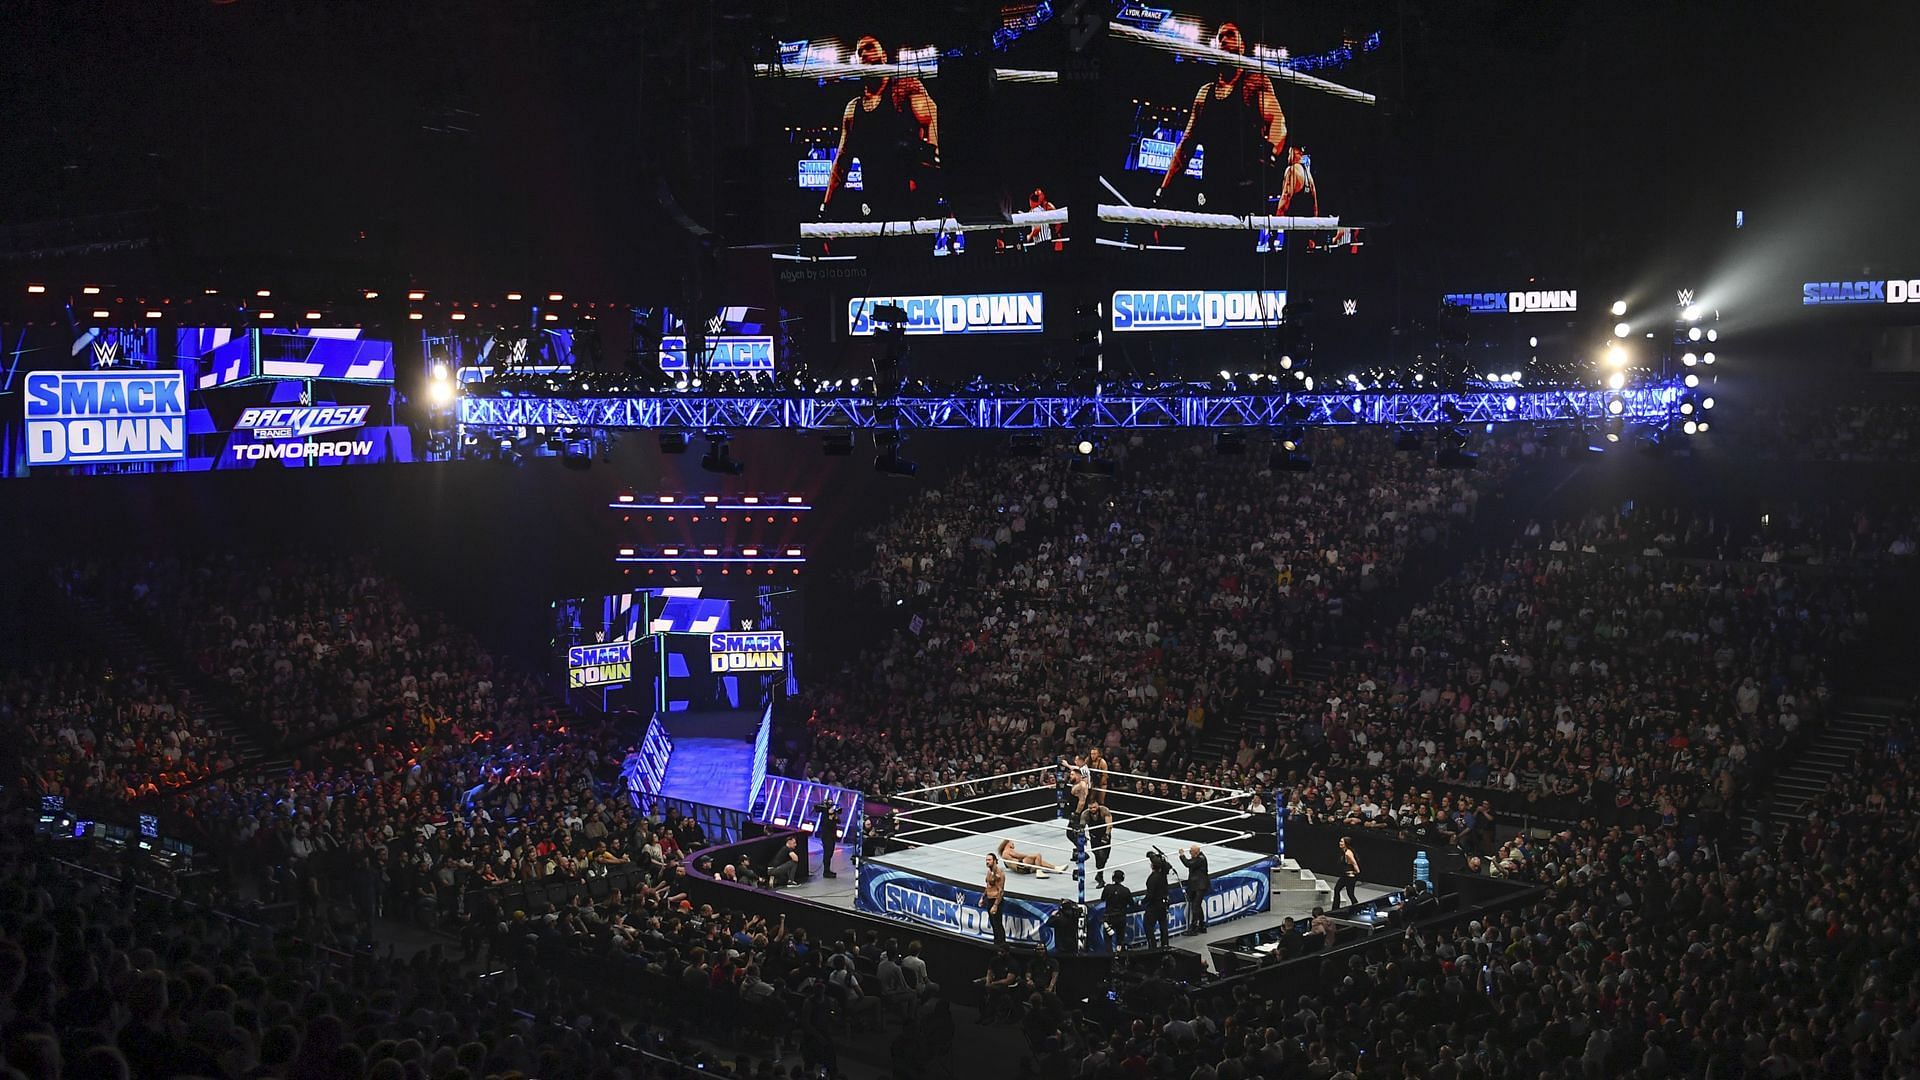 The WWE Universe in France packs their local arena for SmackDown